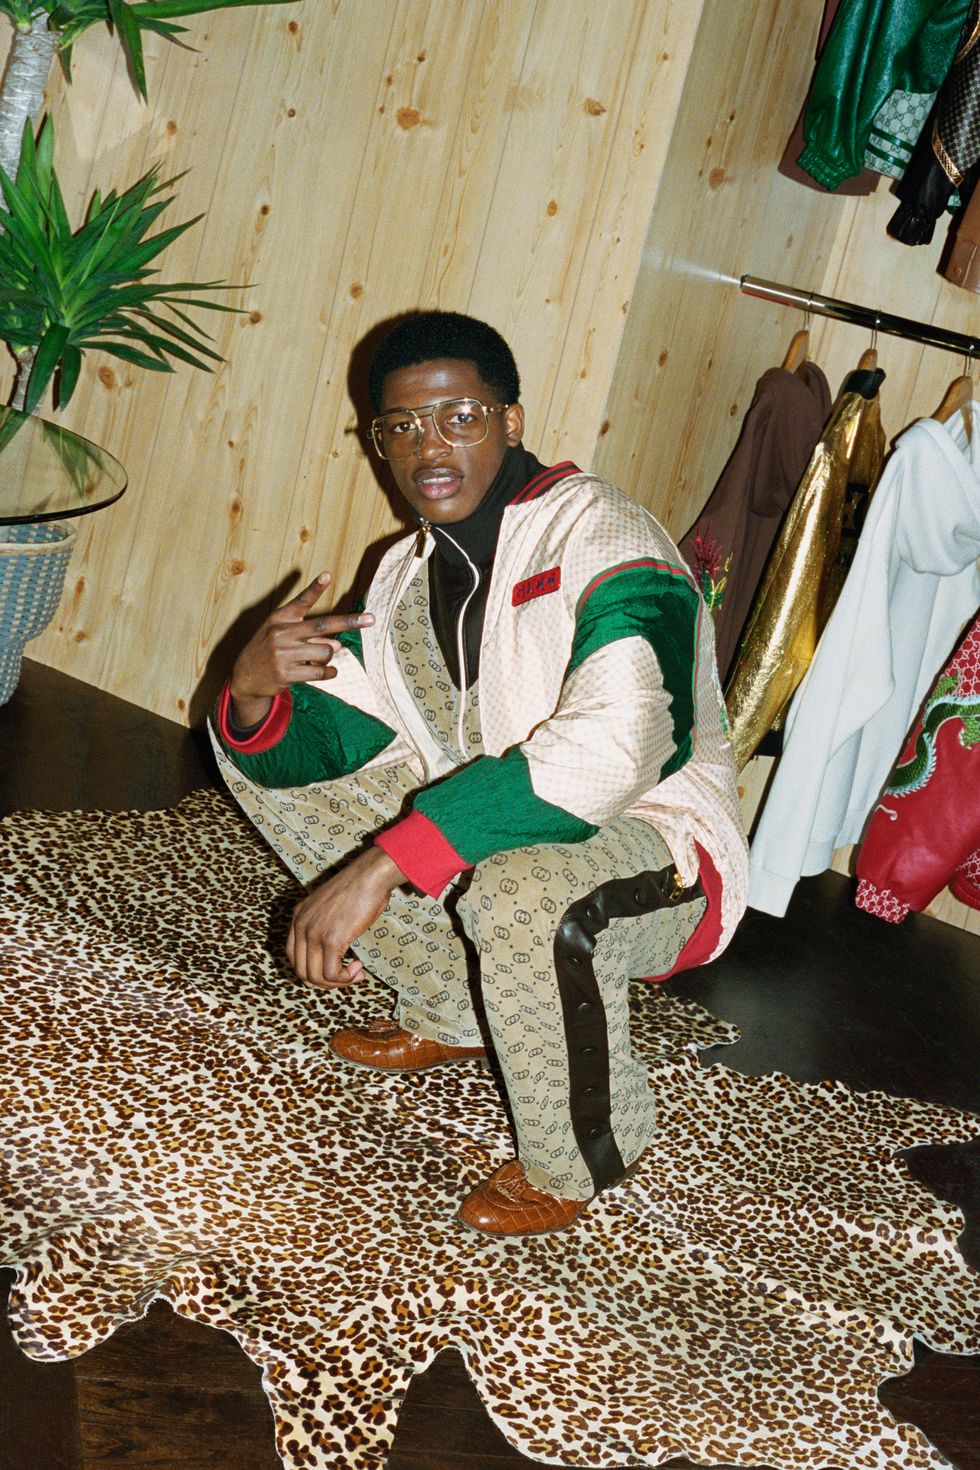 Gucci X Dapper Dan: The Much-Awaited Collaboration Is Finally Here